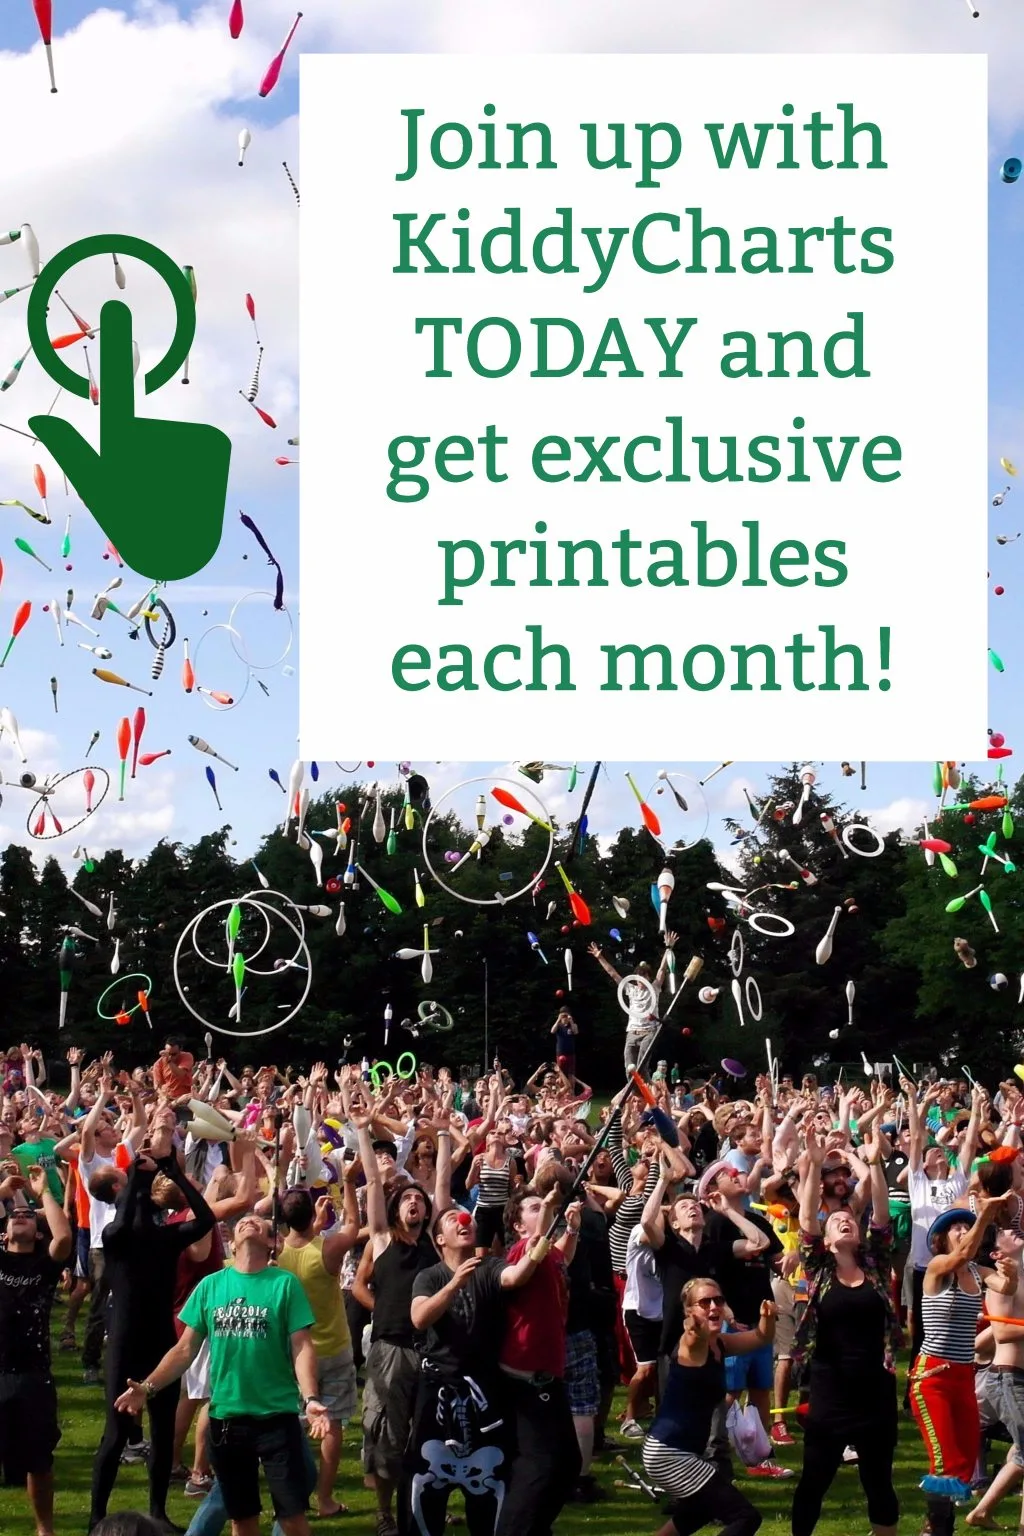 Do YOU want to be a member of an exclusive club and get gree printables each month for the kids, to keep them busy so you can finally have THAT sit down for a bit? Then join us here at KiddyCharts for our exclusive printables in our KiddyCharts KiddyClus Crew! We want YOU!